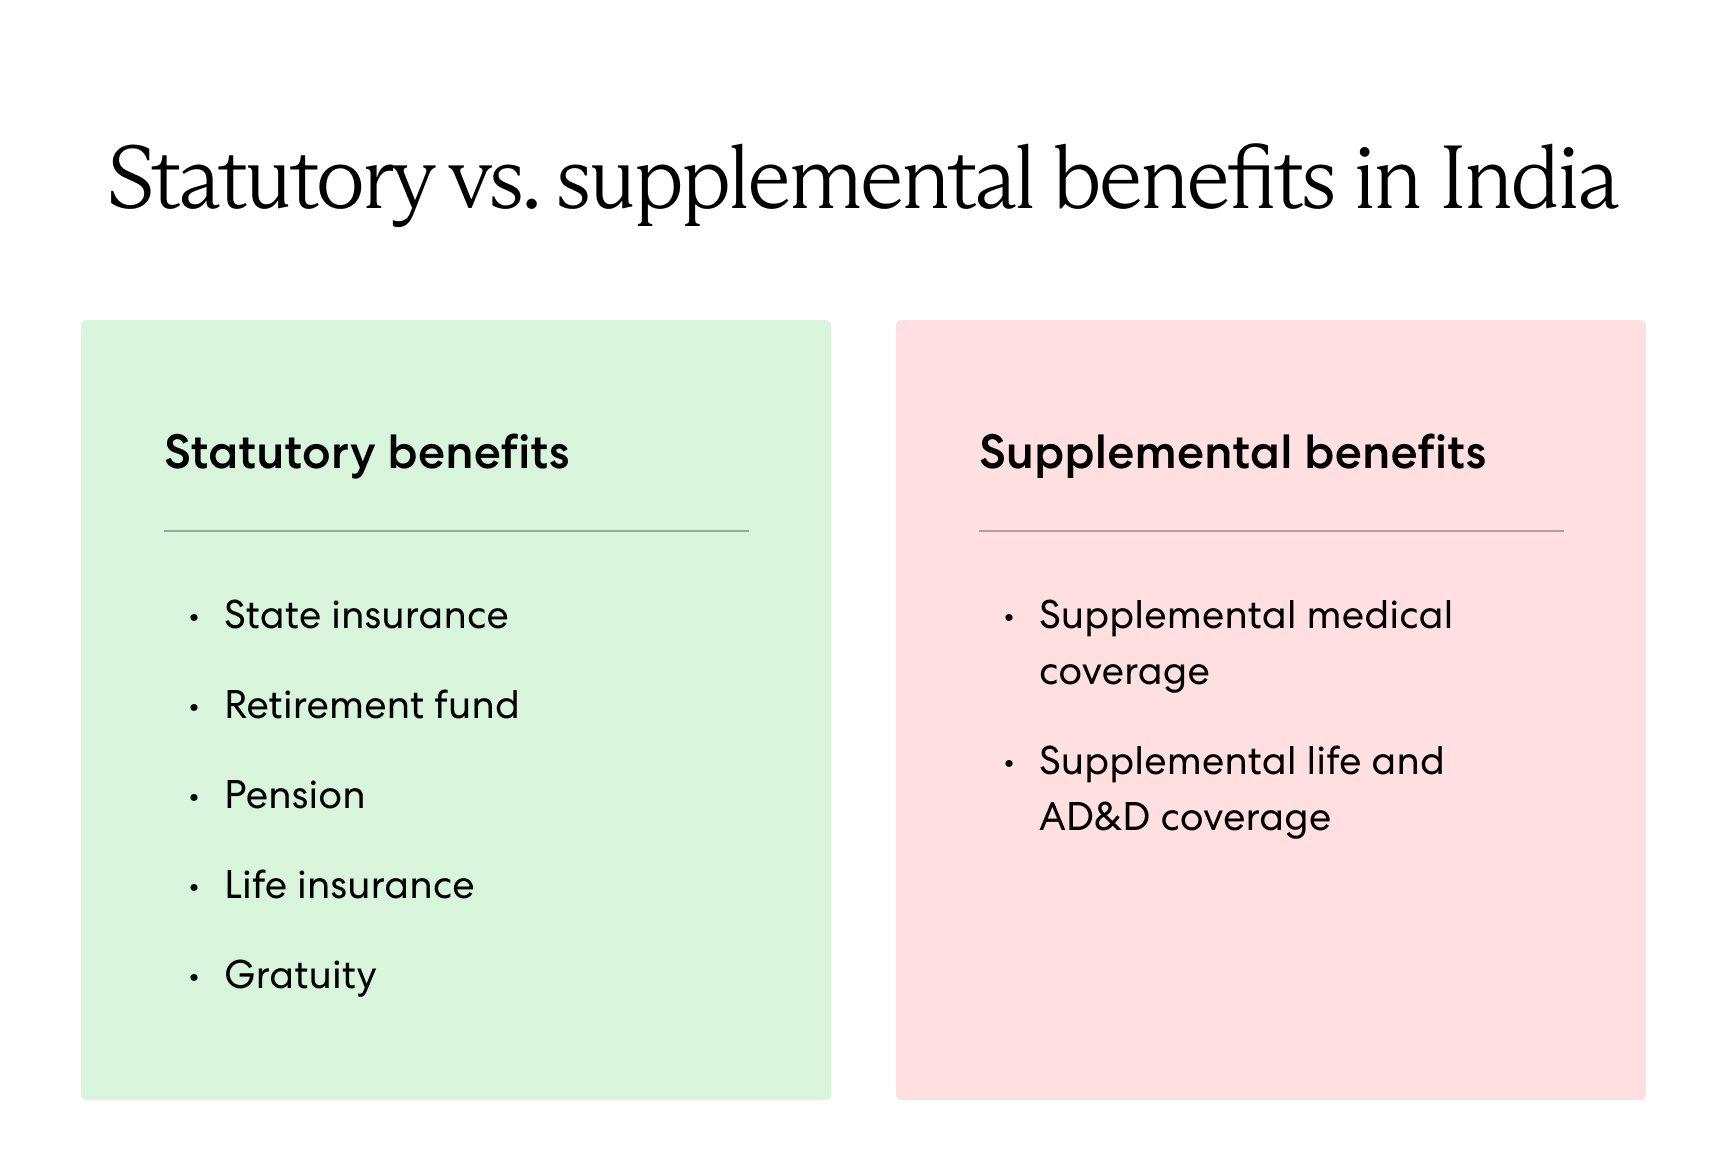 Statutory benefits in India include State Insurance, Retirement Fund, Pension, Life Insurance, Gratuity. Supplemental benefits in India includes Supplemental Medical Coverage and Supplemental Life and AD&D Coverage